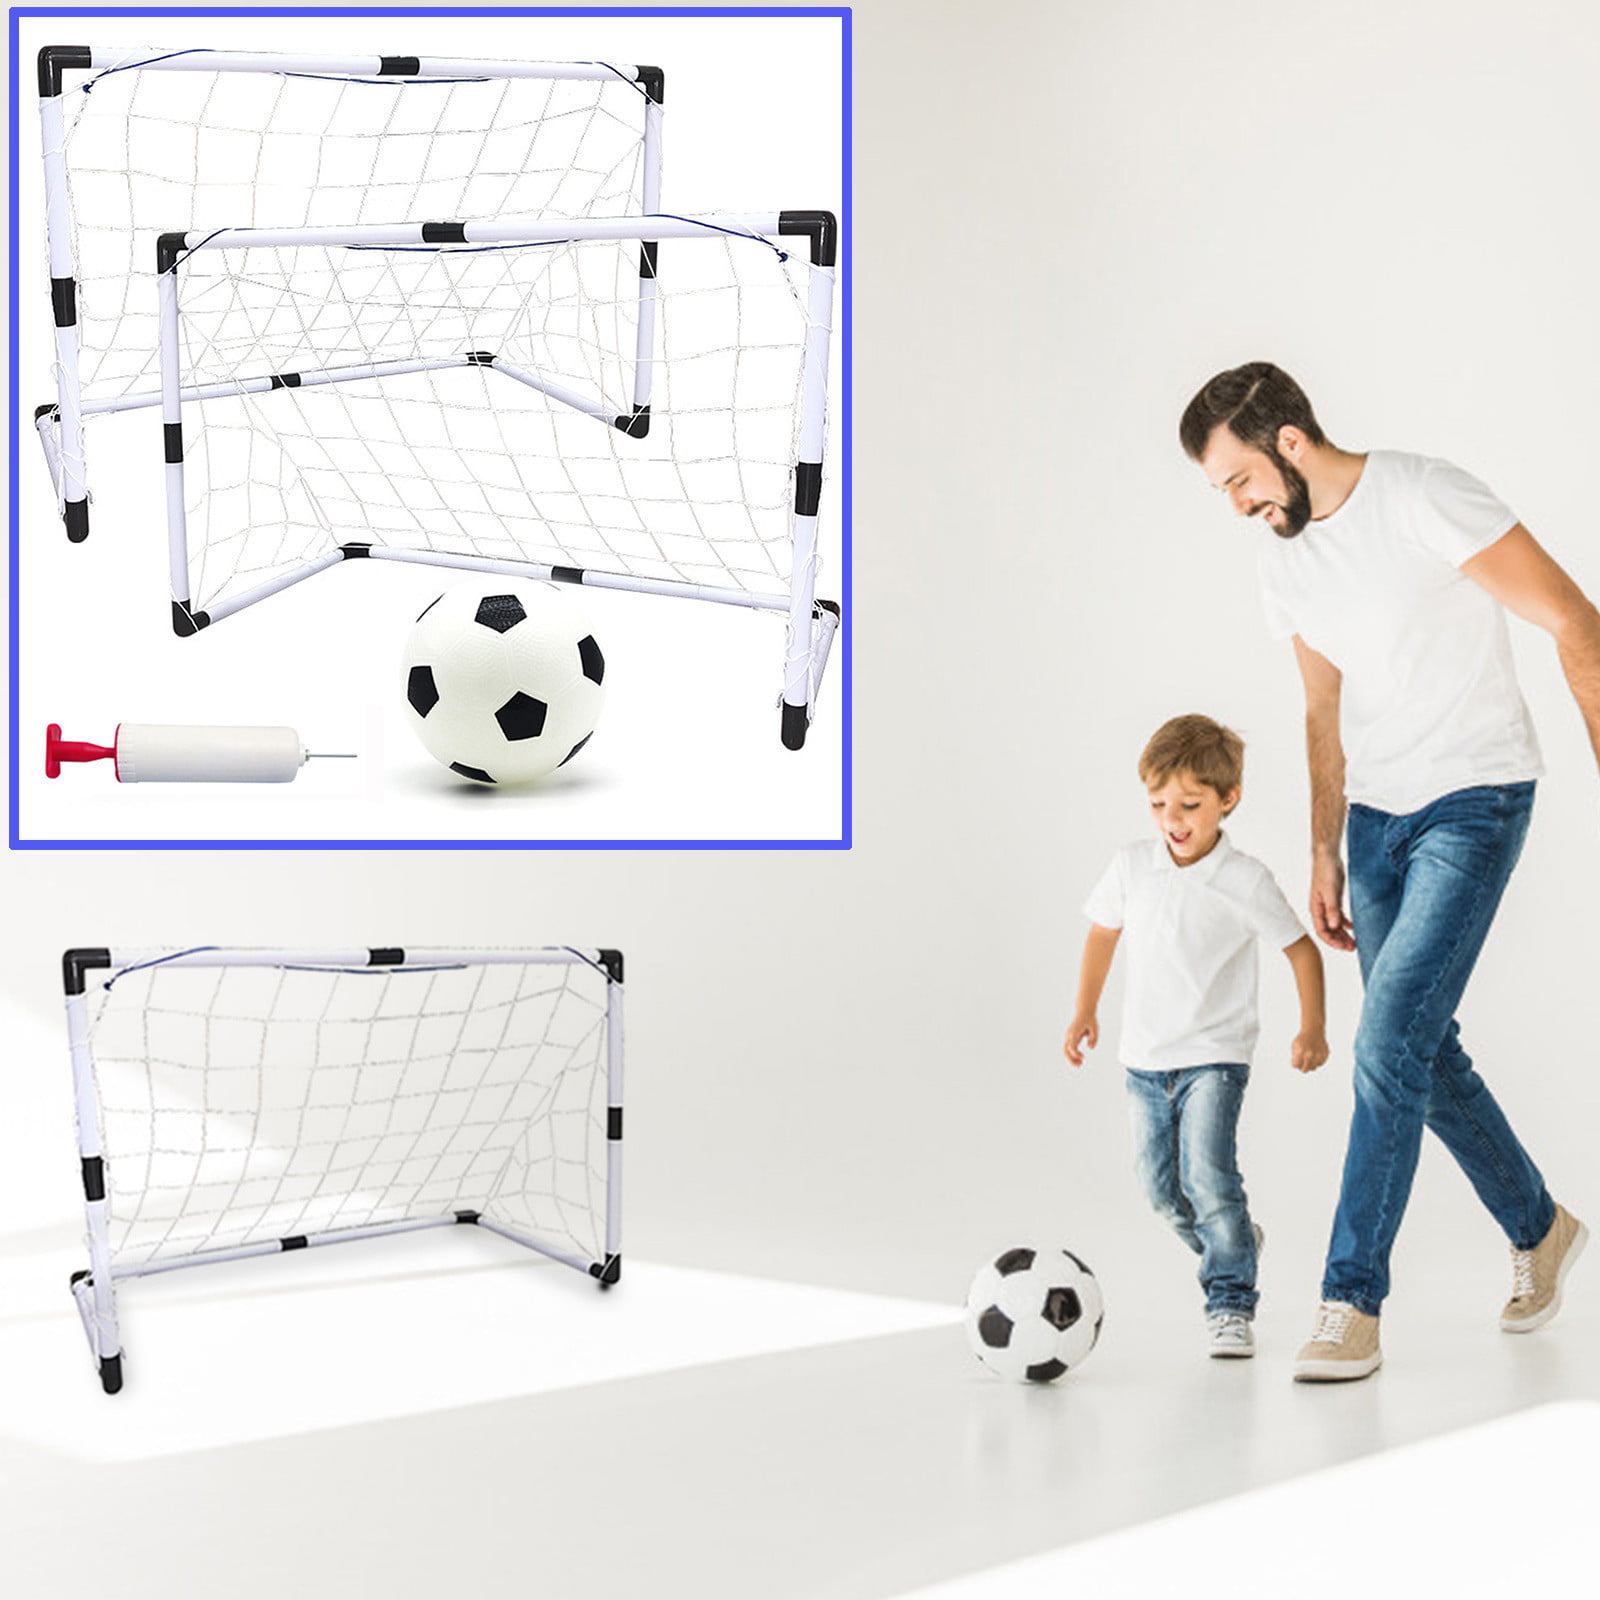 Childrens Soccer Ball 2 Pcs Mini Soccer Ball Toys Kids Children Indoor Outdoor Activities Sports Football Toy Official Size Of 2 For 3-6 Years Old Boys And Girls,Random Color for Childrens Day Kinde 